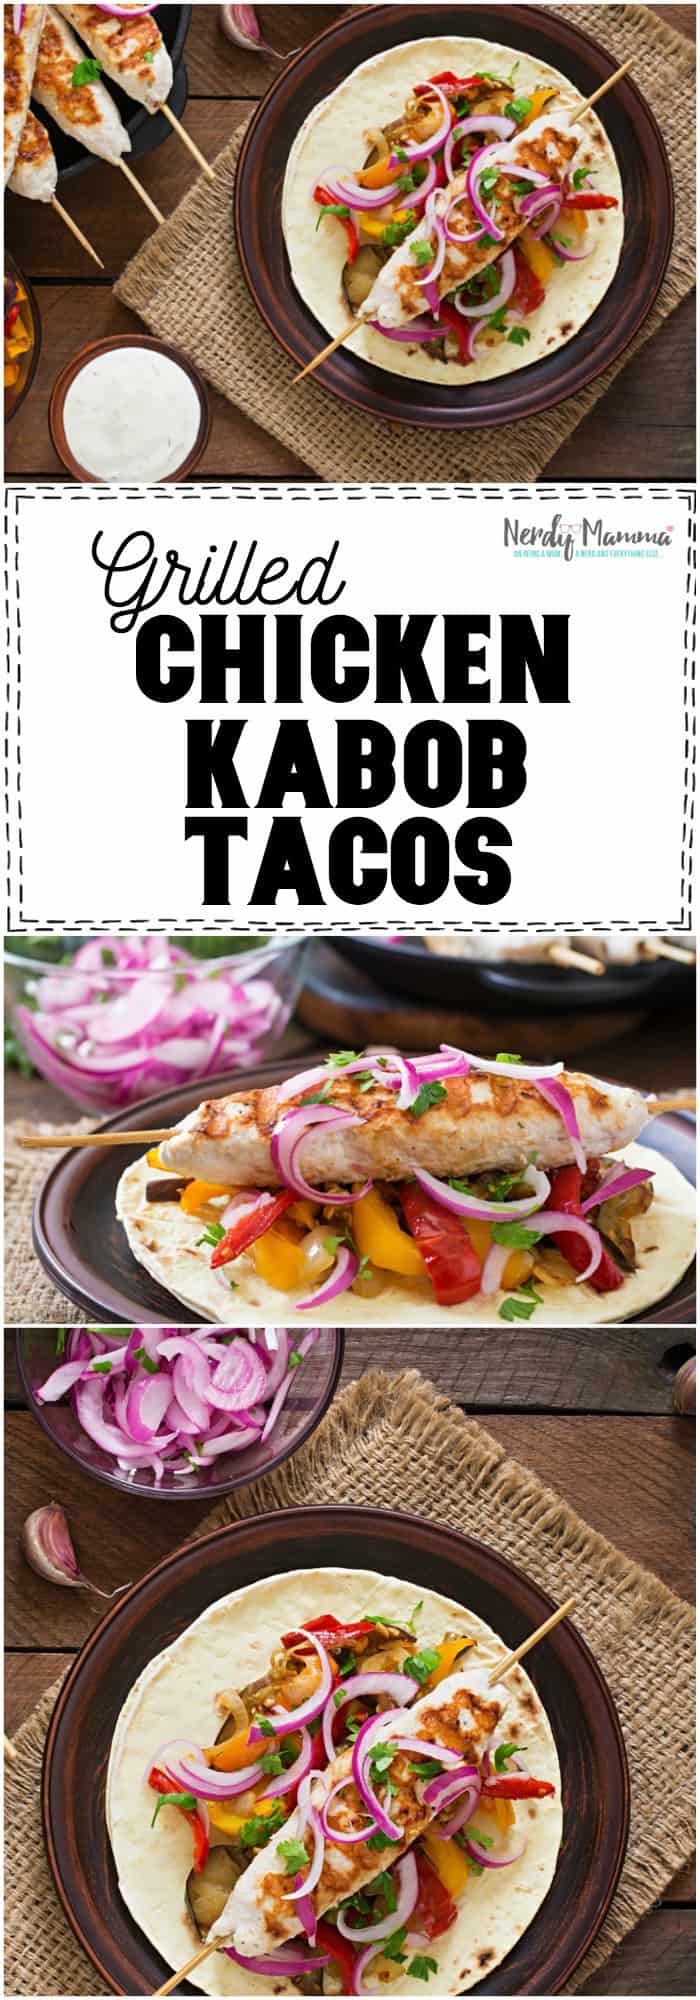 Oh. I love the idea of these Chicken Kabob Tacos--so easy and so fun for the kids! #taco #texmex #mexican #food #foodtruckfood #taco #tasty #yum